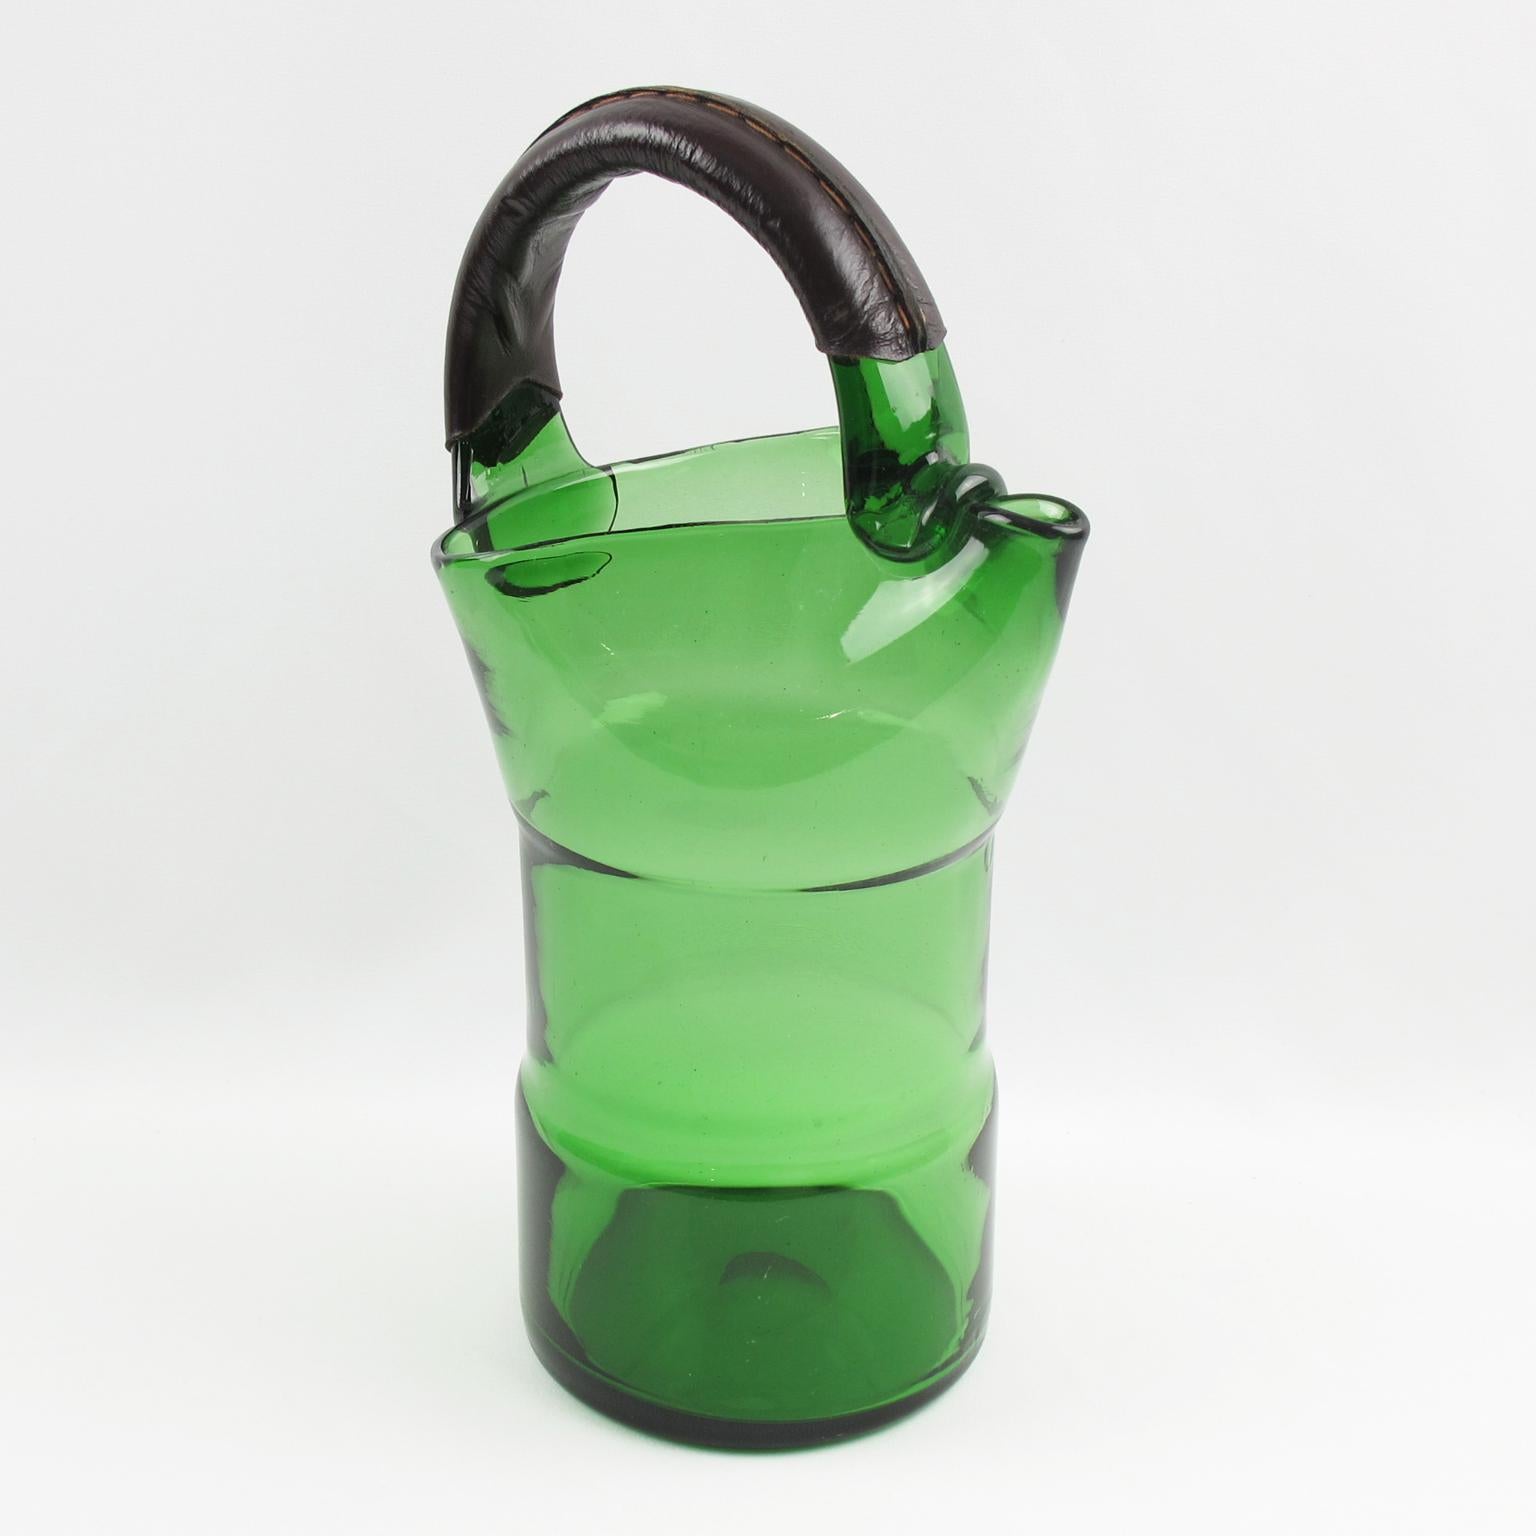 This is a stunning Italian mouth-blown glass cocktail pitcher crafted in the 1960s. This lovely green glass mixer jug is accented with a dark brown hand-stitched leather handle and is perfect for barware use and serving lemonade or water. A polished